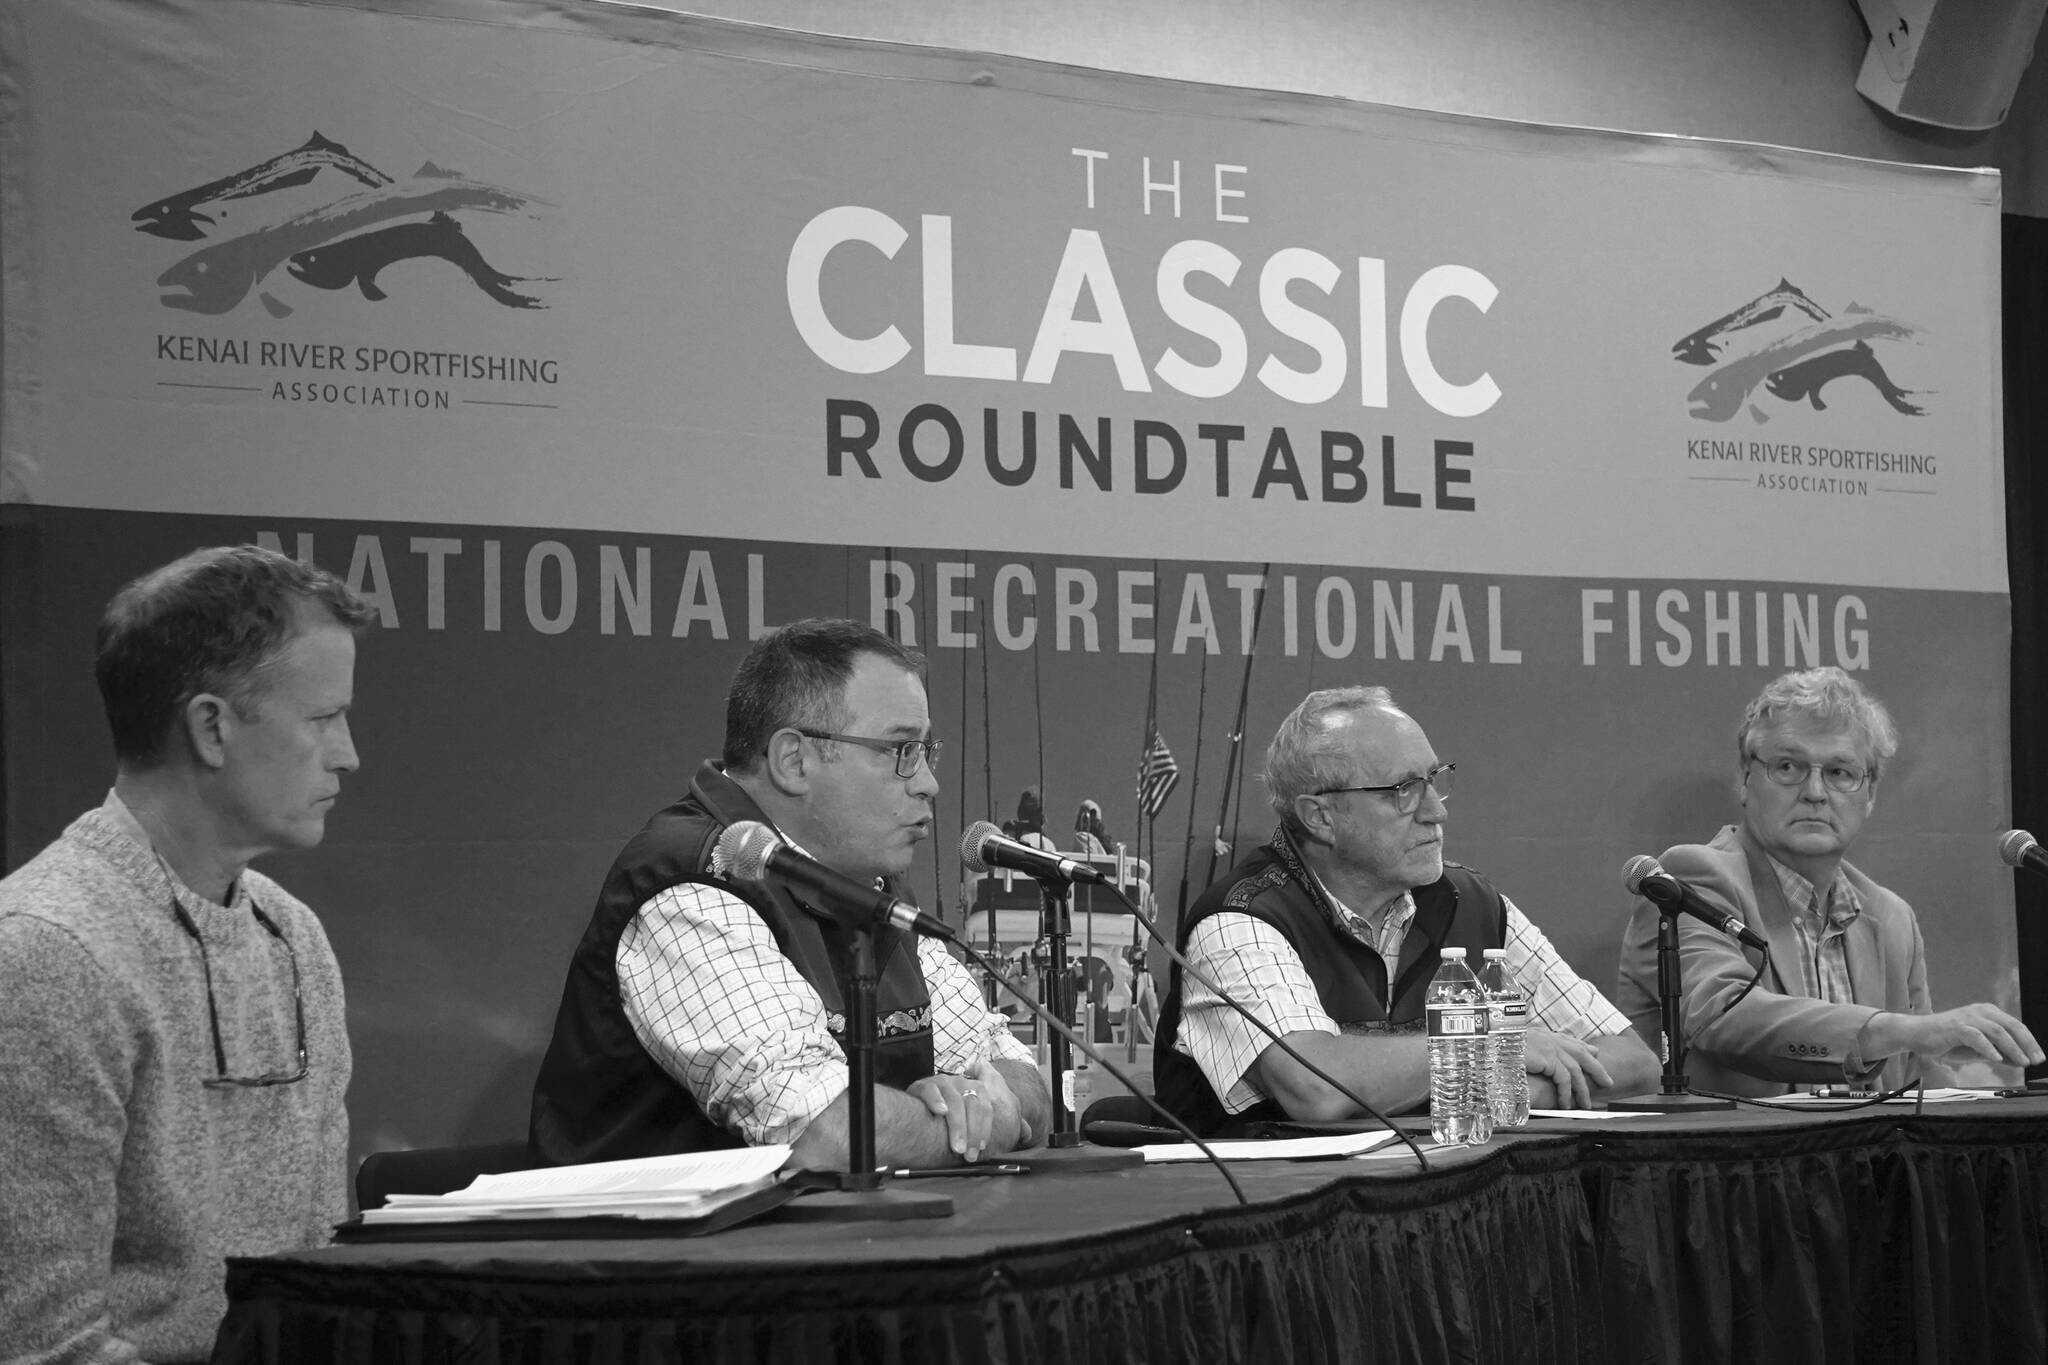 U.S. Fish and Wildlife Service Senior Advisor for Conservation Boyd Bilhovde, Bureau of Land Management Alaska Director Steve Cohn, Alaska Department of Fish and Game Commissioner Doug Vincent-Lang and Alaska State Parks Director Ricky Gease participate in a panel discussion at the Kenai River Sportfishing Association's Kenai Classic Roundtable at the Soldotna Regional Sports Complex in Soldotna, Alaska, on Wednesday, Aug. 23, 2023. (Jake Dye/Peninsula Clarion)